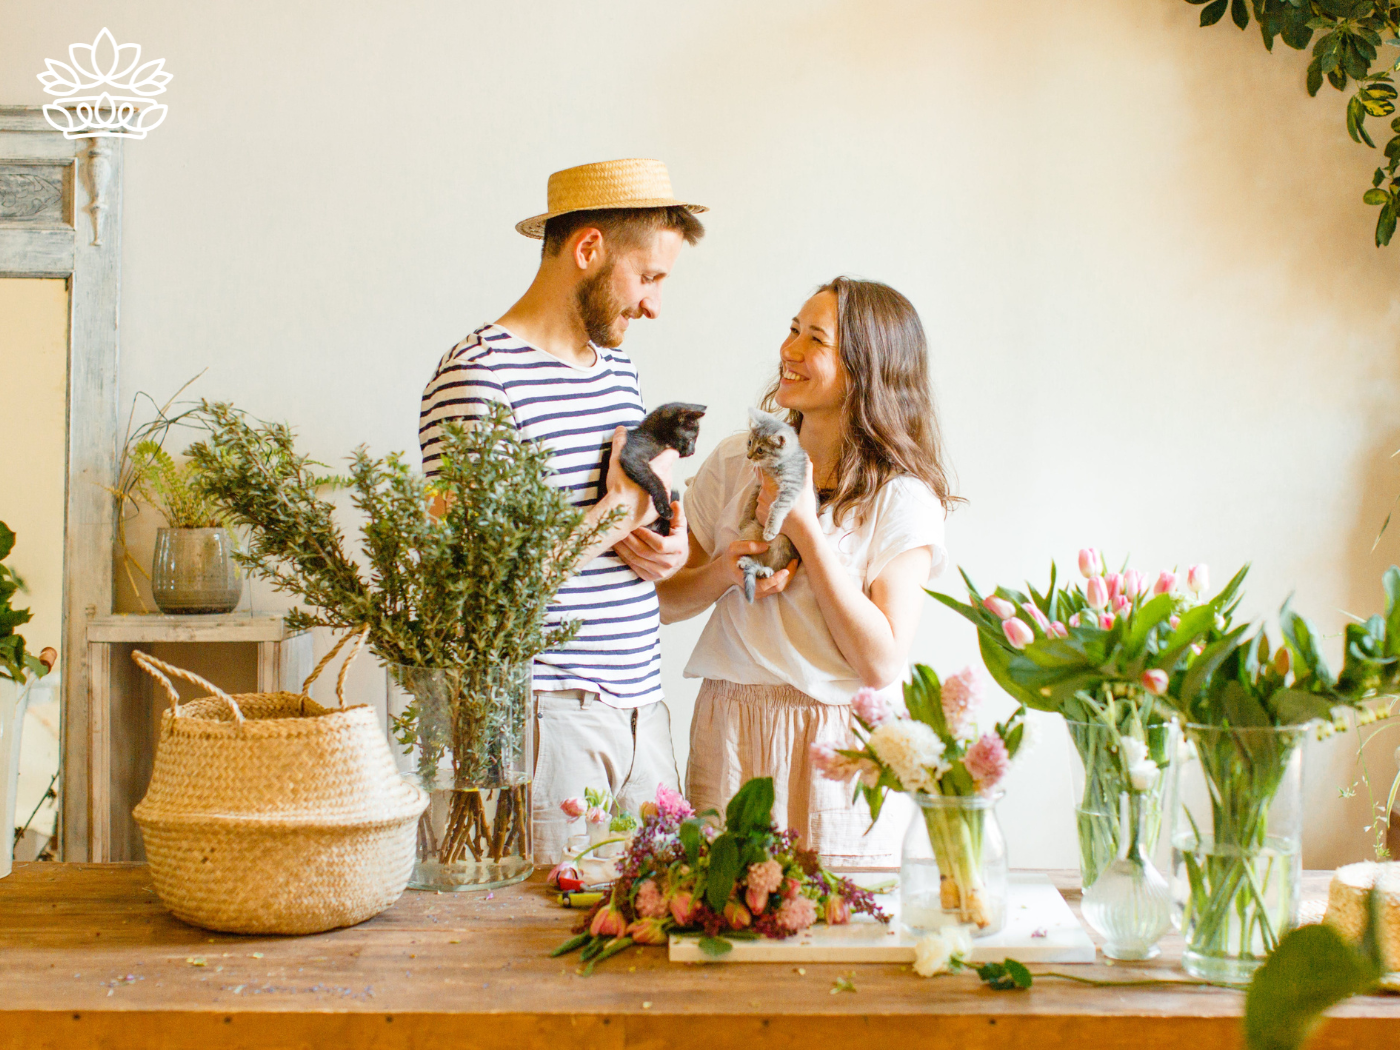 A couple arranging flowers together while holding kittens - Fabulous Flowers and Gifts, All Fabulous Flowers and Gift Boxes.